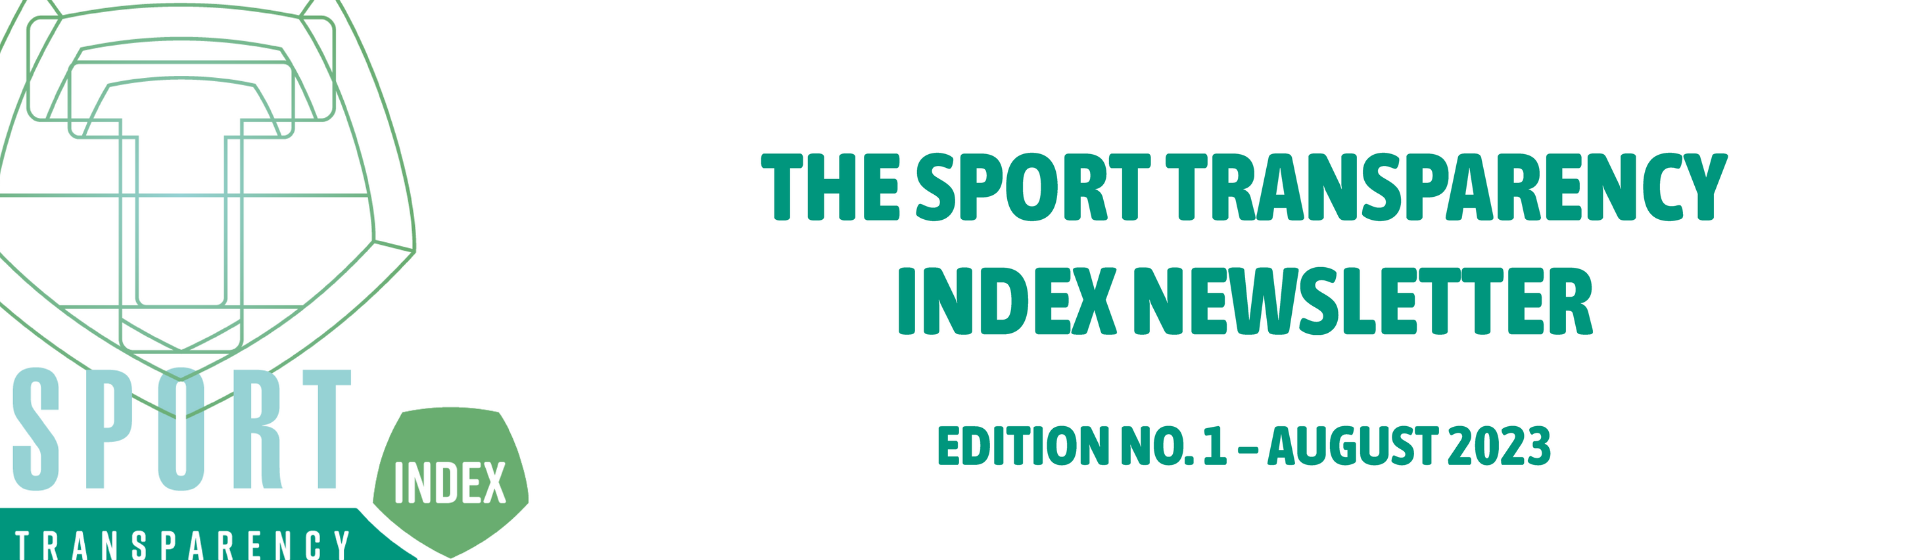 First Sport Transparency Index Newsletter is Out now! header